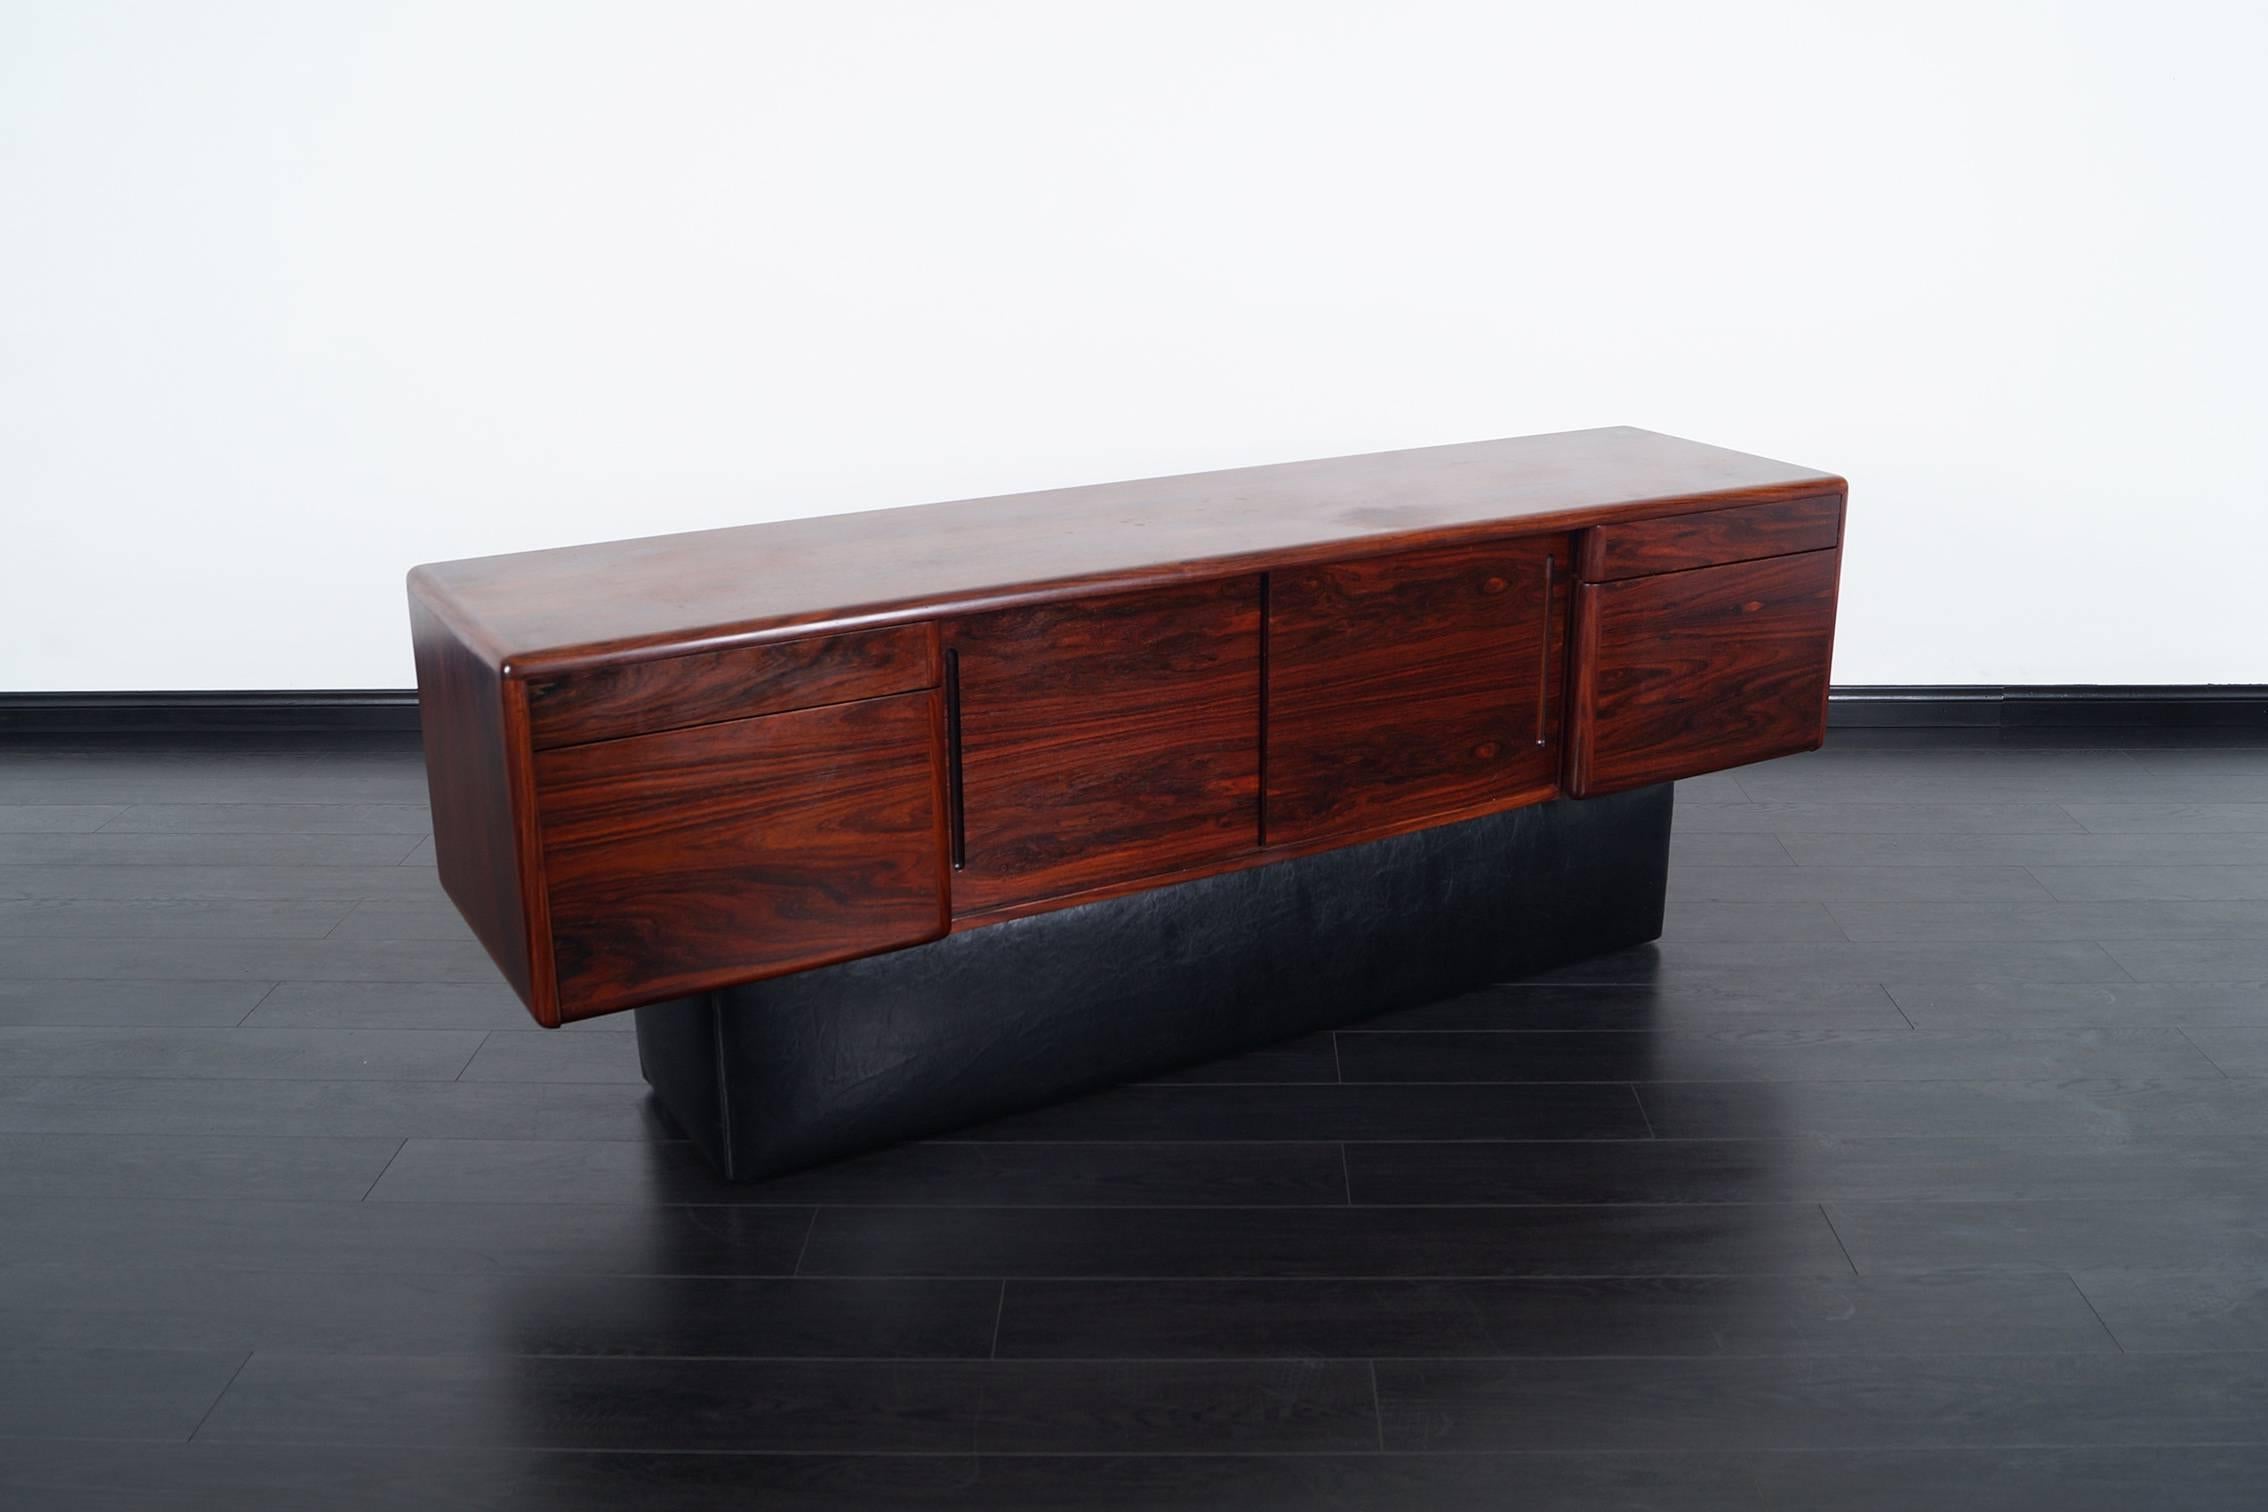 Danish modern Brazilian rosewood credenza. Features four drawers, two sliding doors, and leatherette base.